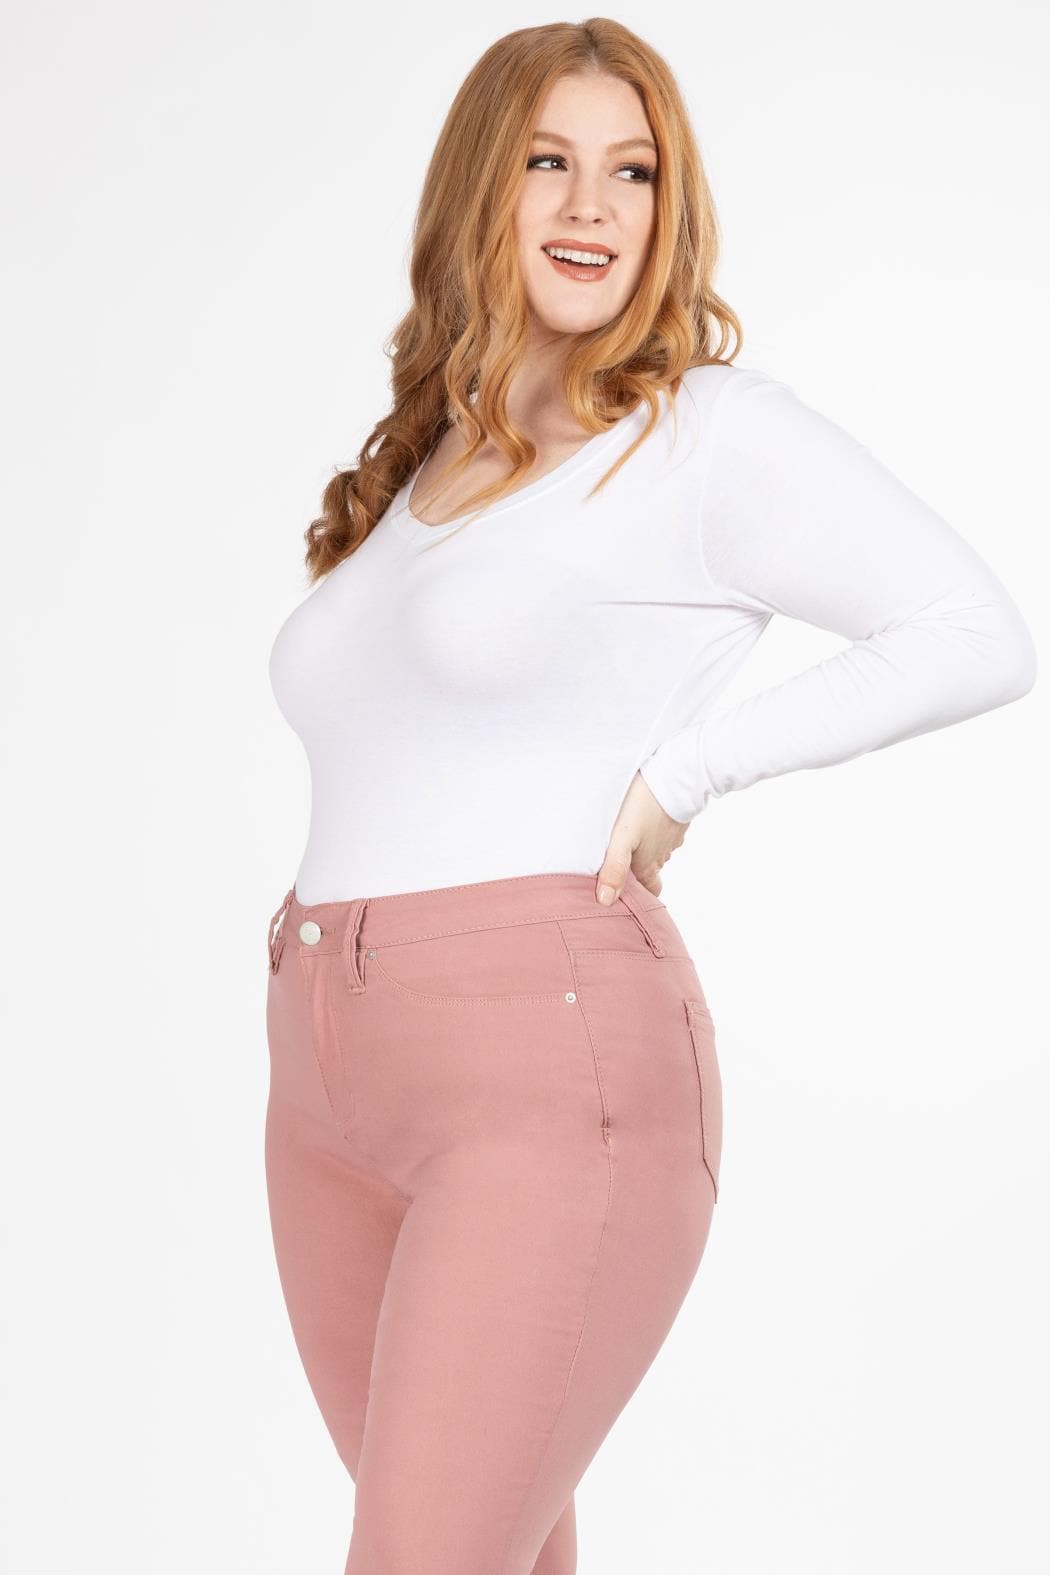 Royalty For Me Women's Missy Plus Size Pull on Pants with Dog Bite